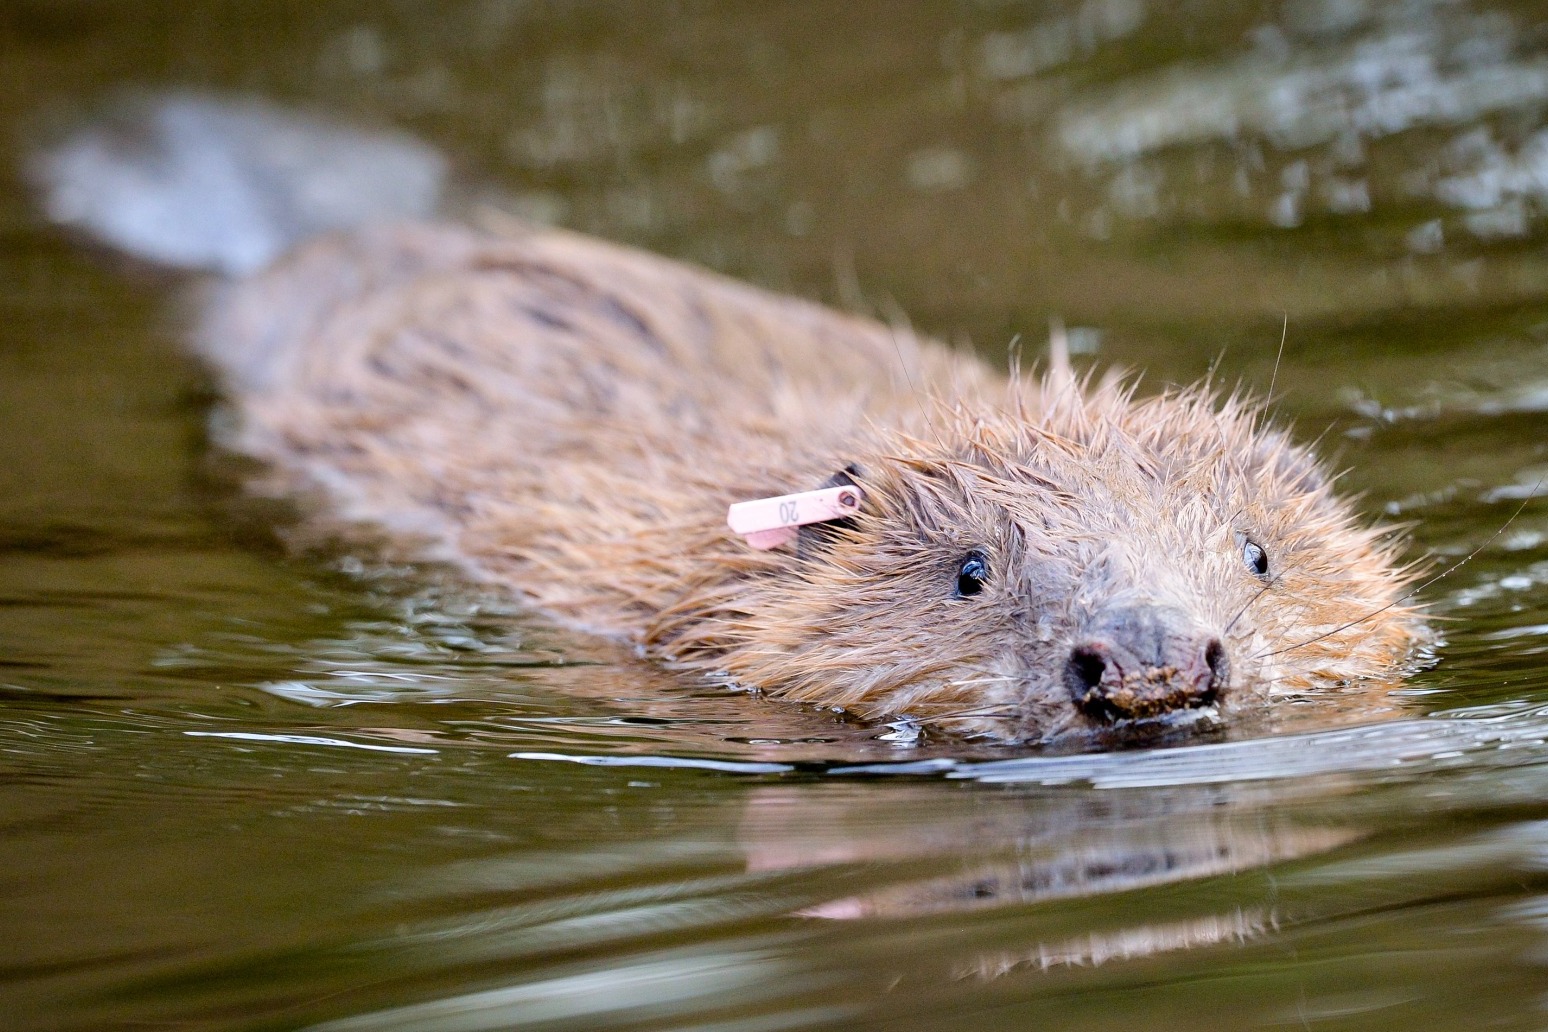 Beavers to be released into the wild under ‘cautious’ Government plans 